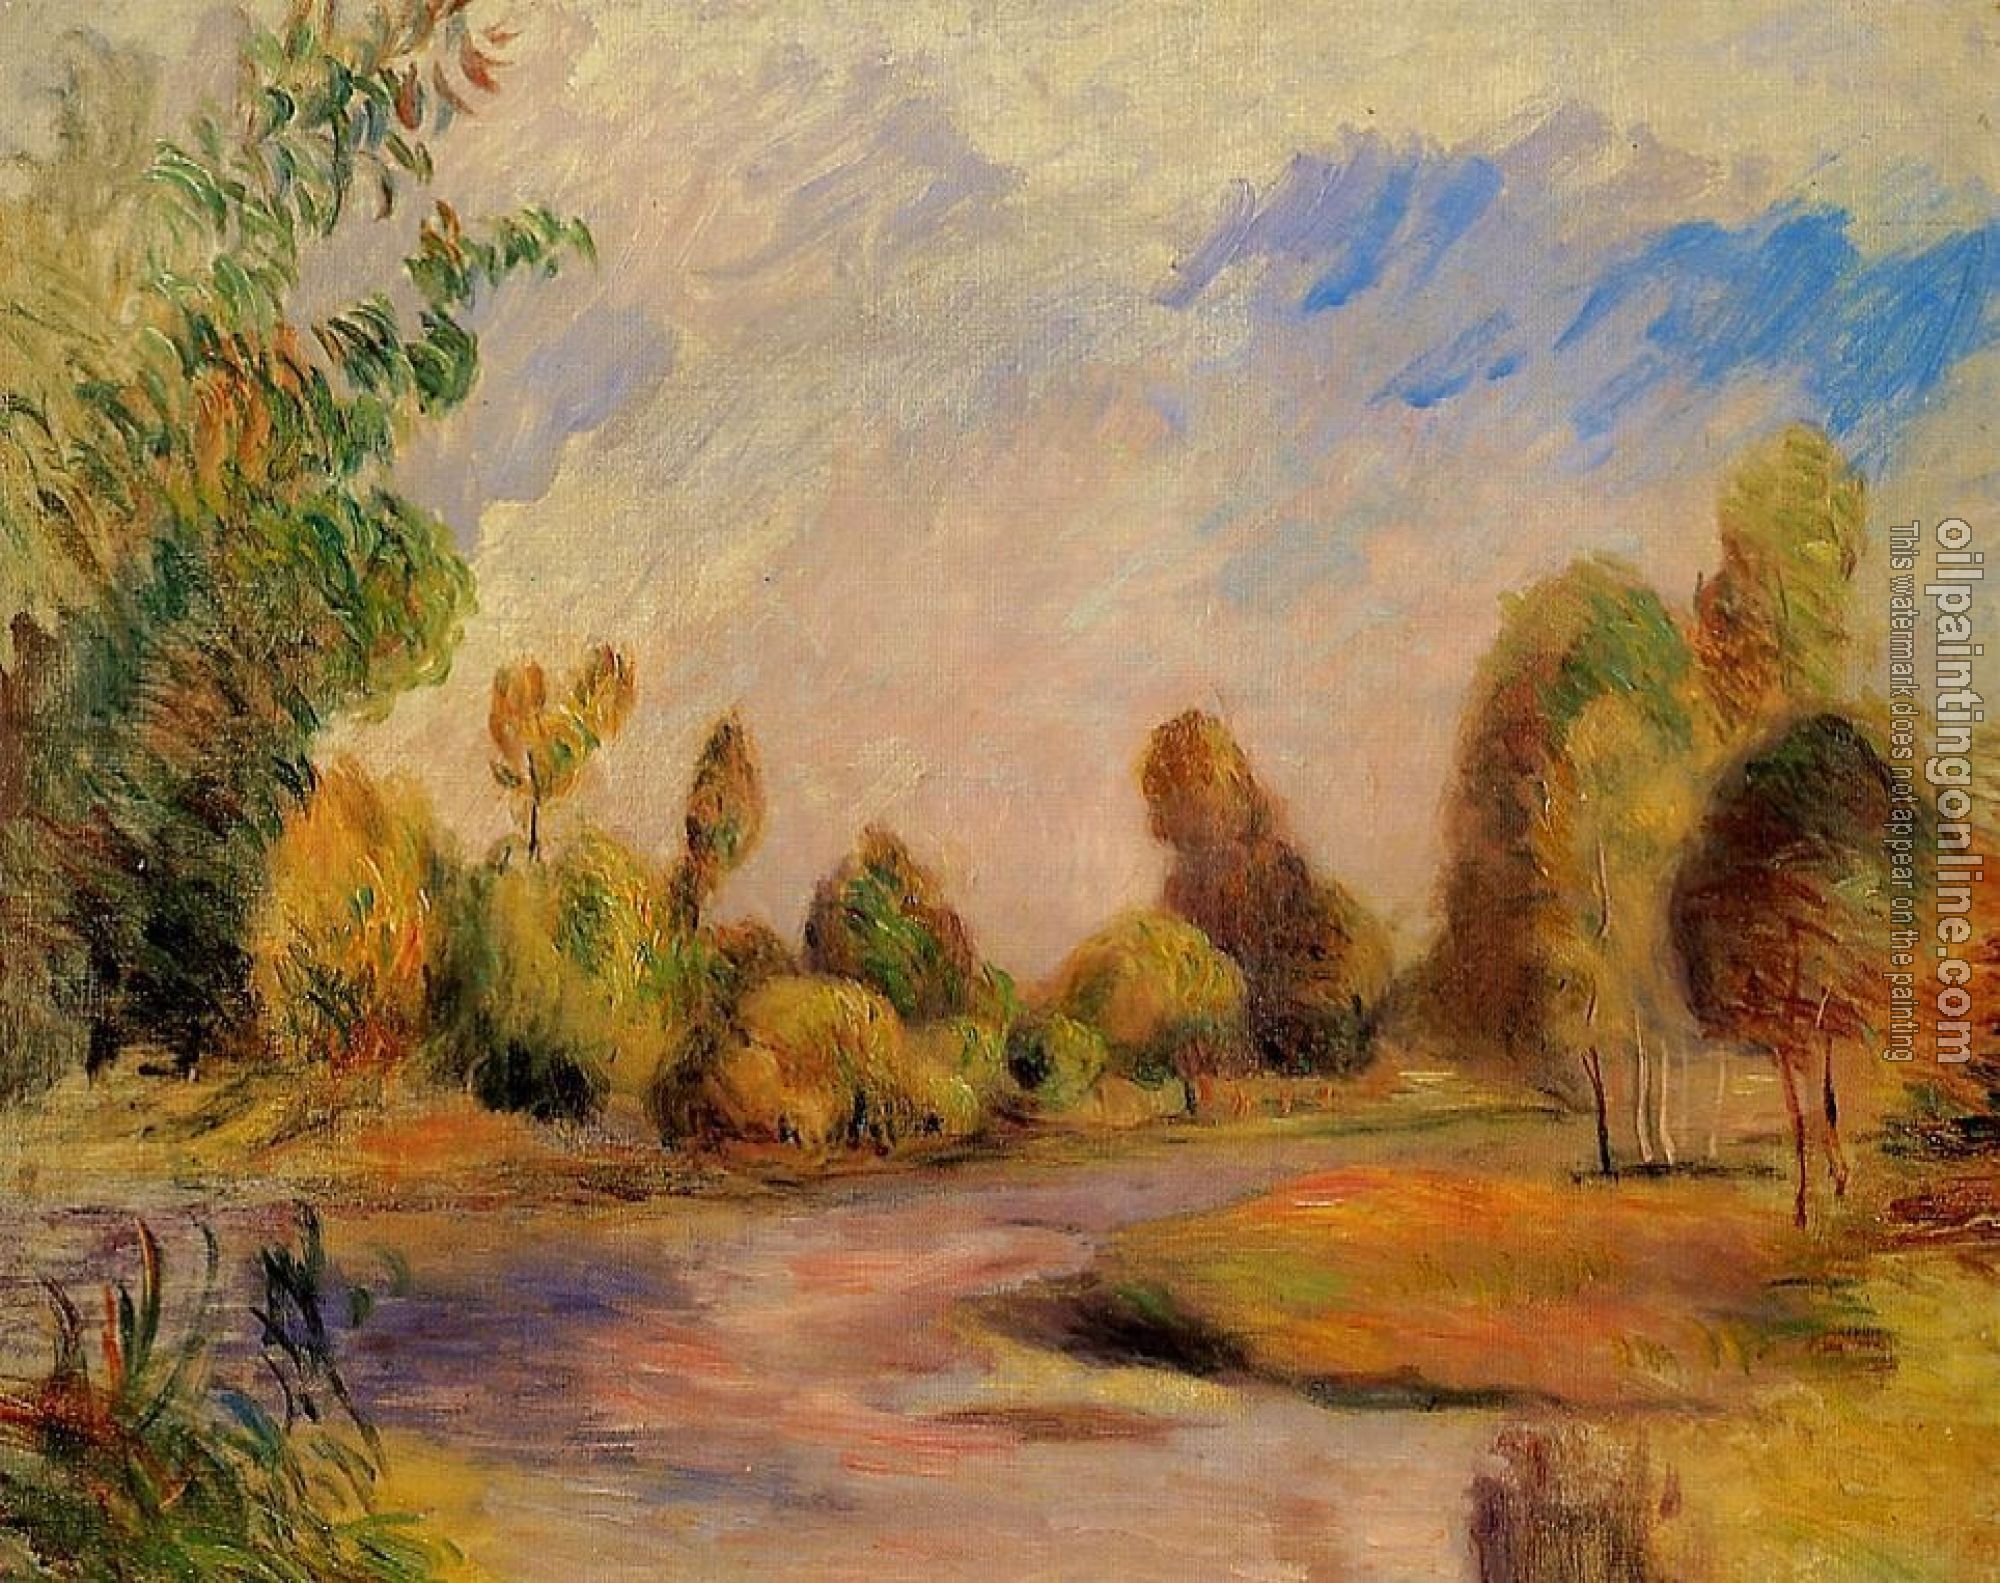 Renoir, Pierre Auguste - The Banks of the River